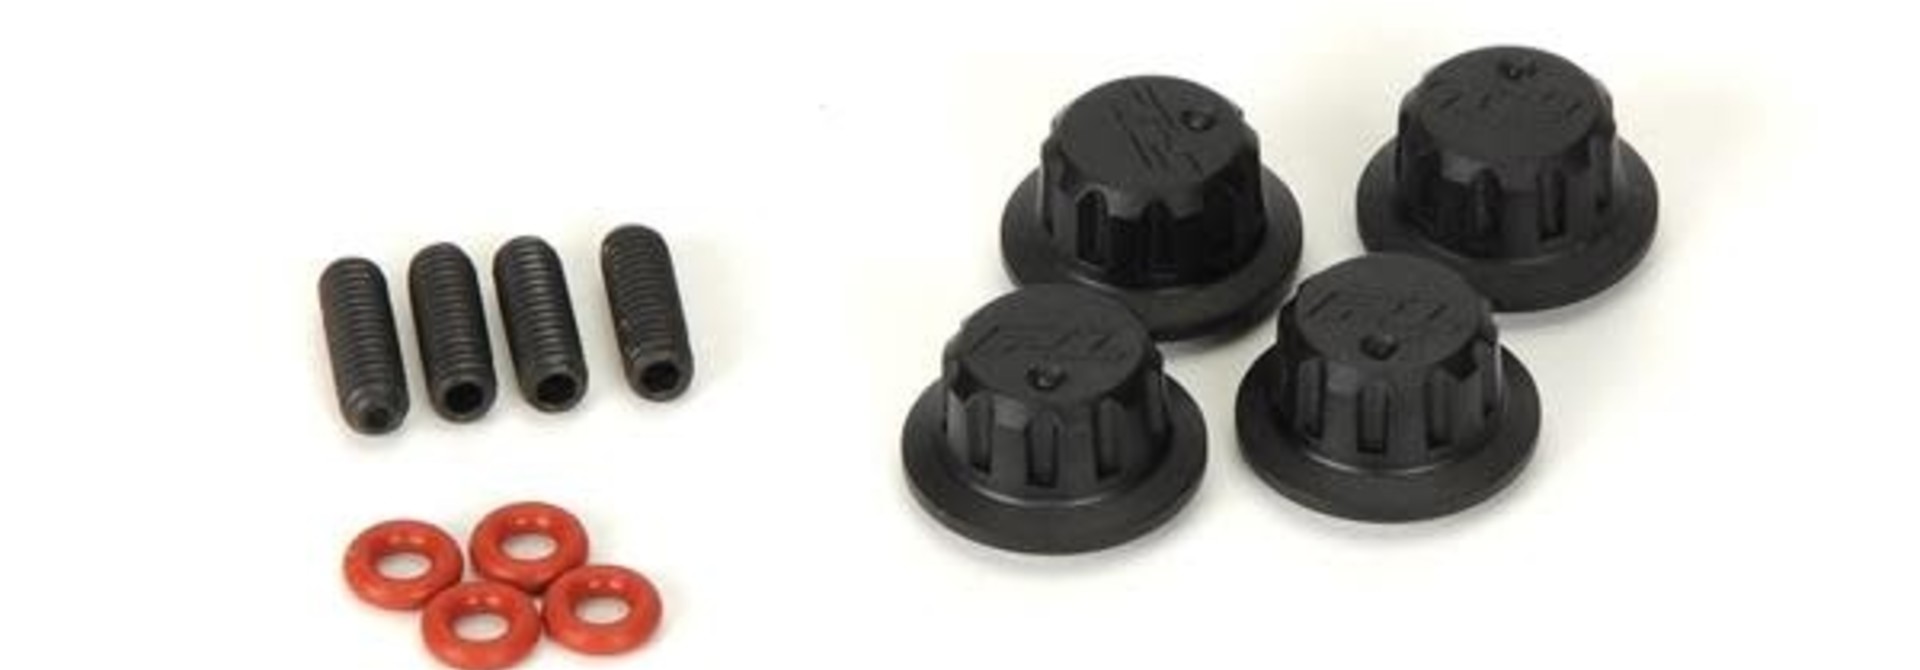 Body Mount Secure-Loc Caps Kit for Body Mount